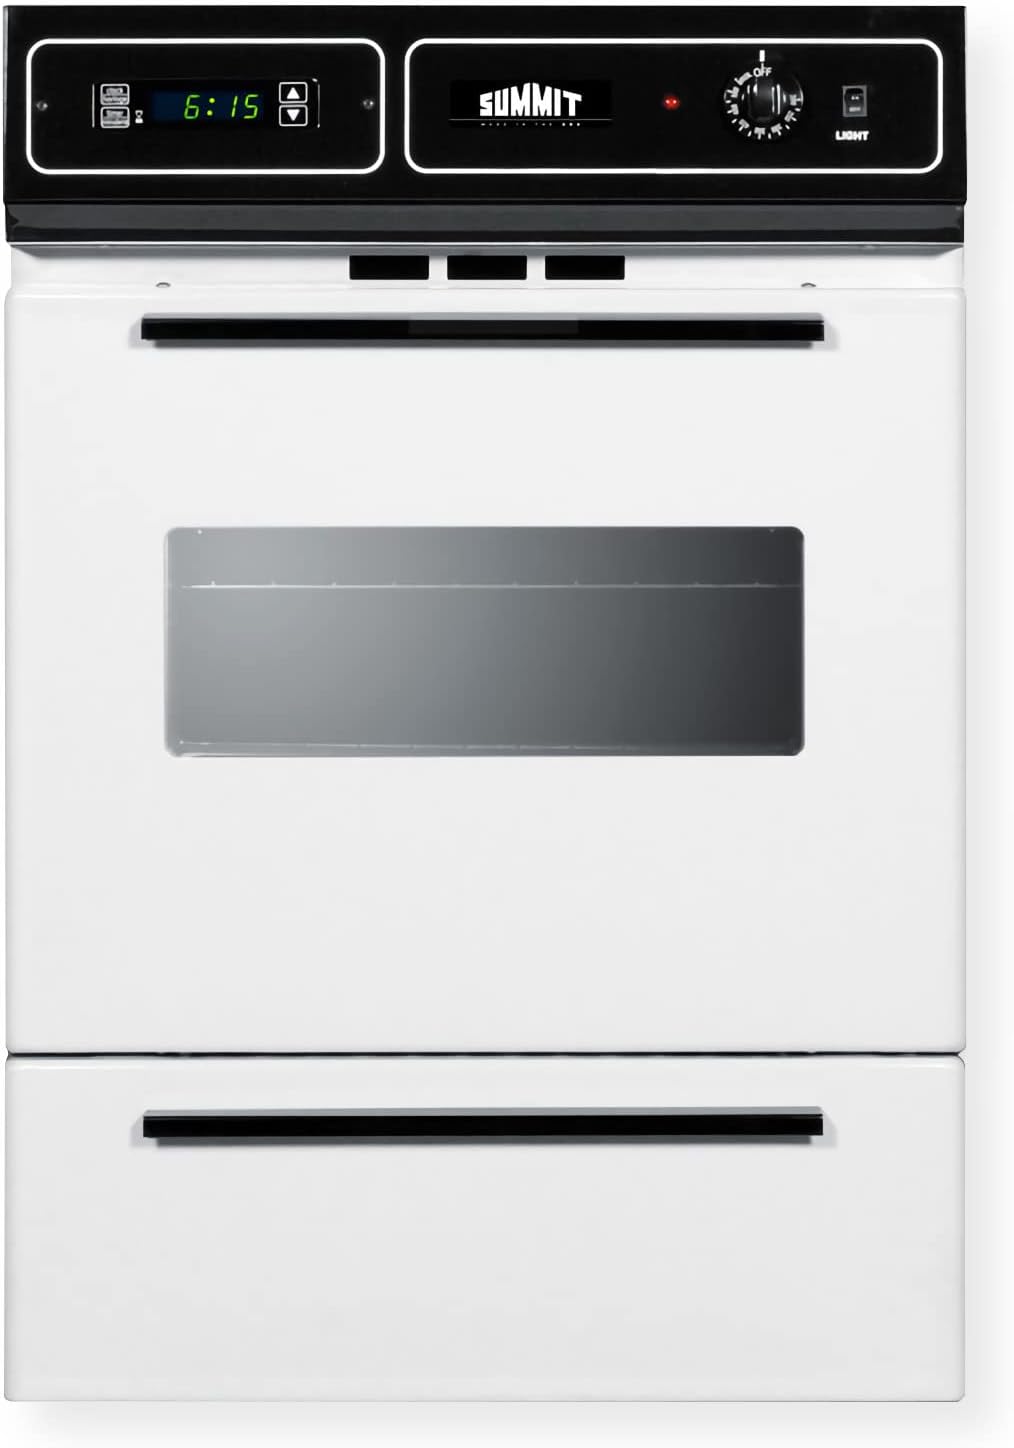 gas wall oven detailed review